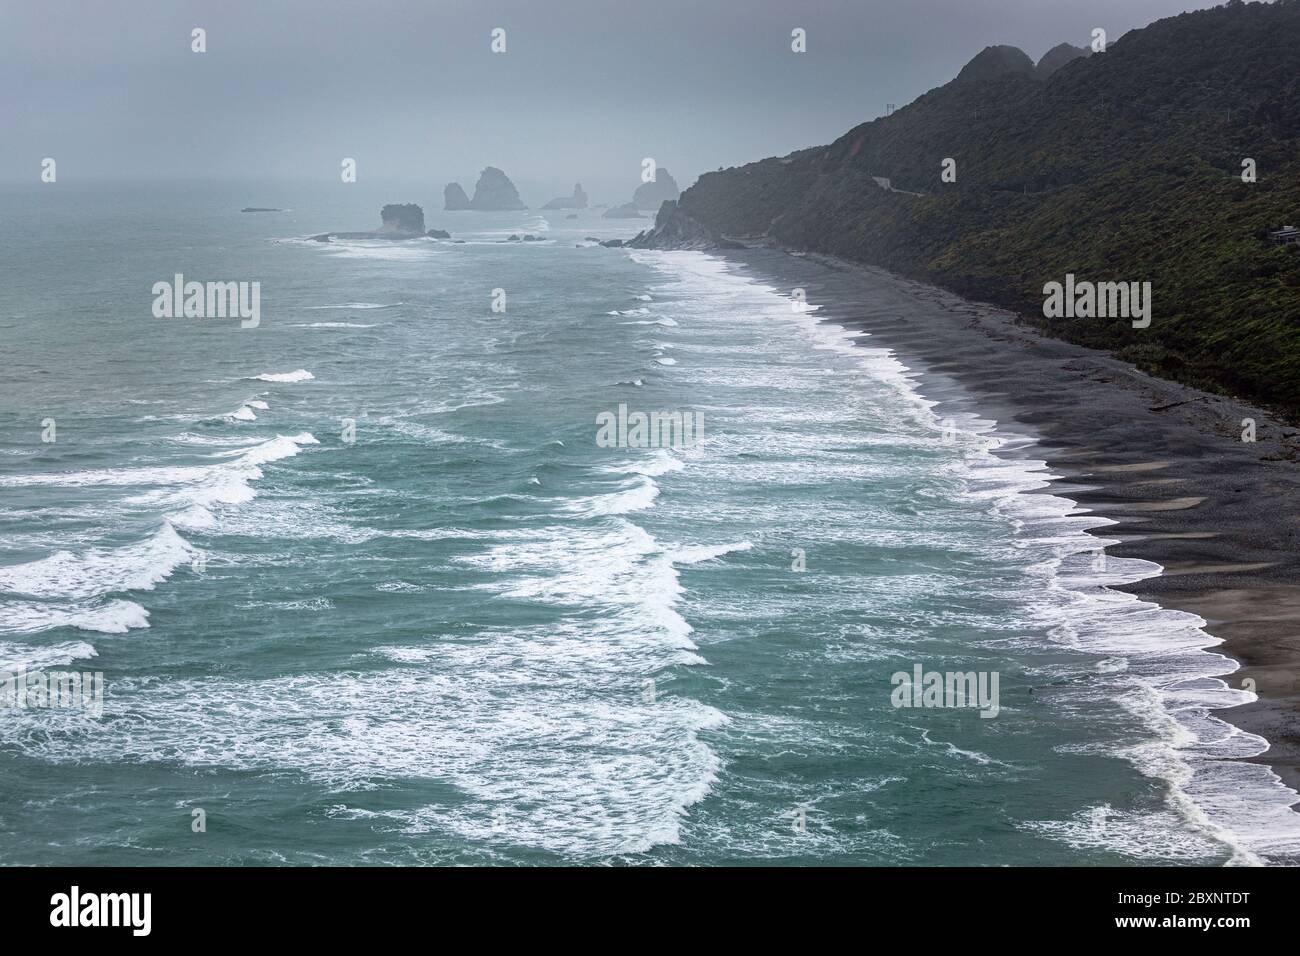 A stormy day at Nine Mile Beach on the dramatic West Coast of New Zealand's South Island Stock Photo